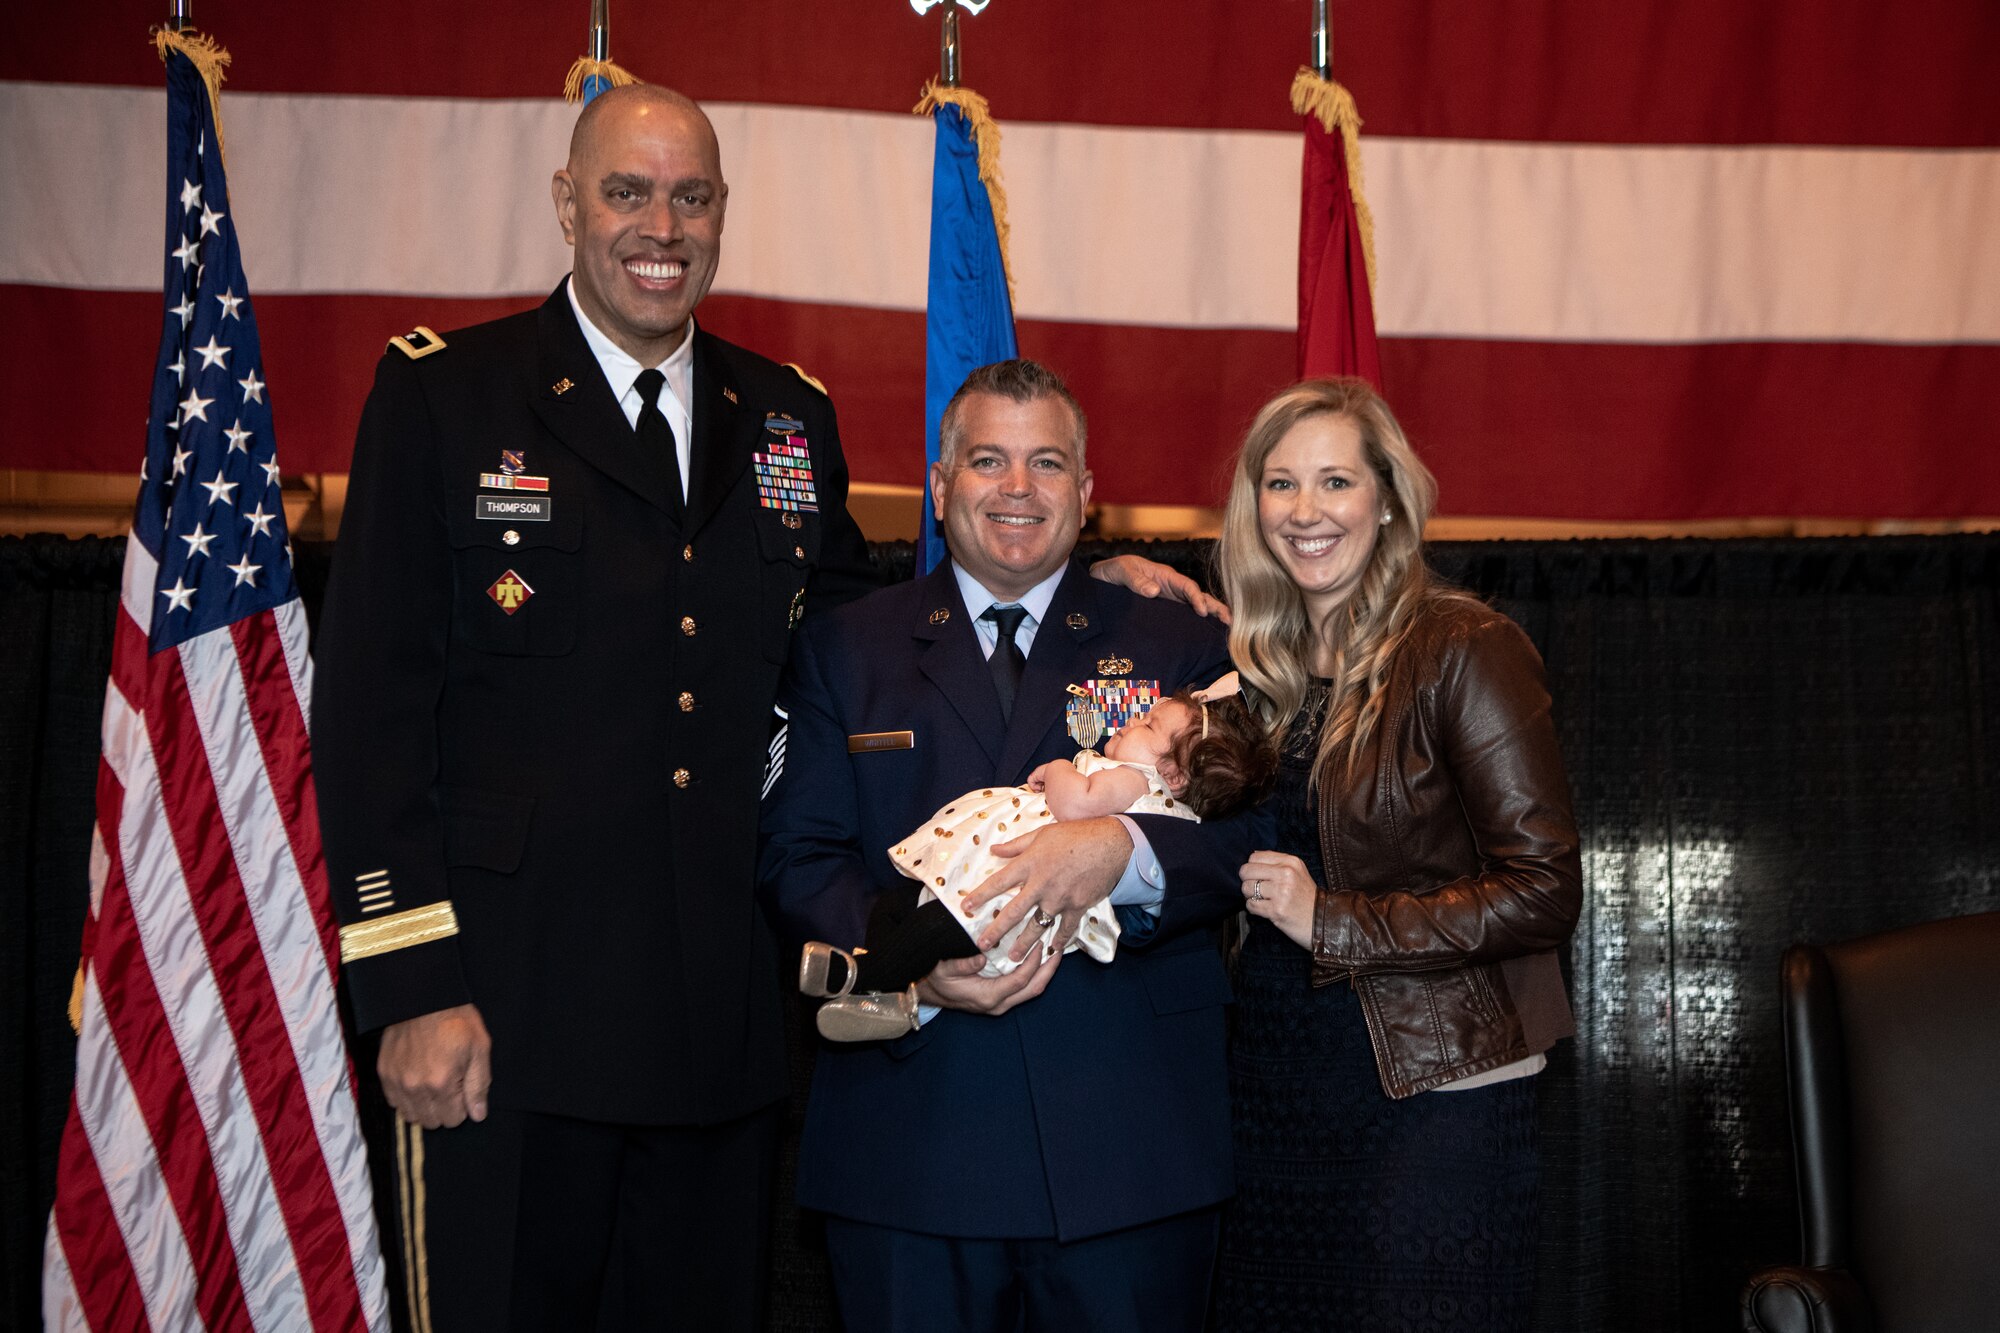 U.S. Air Force Master Sgt. Bryan Whittle, with the 205th Engineering and Installation Squadron, poses with Maj. Gen. Michael C. Thompson, adjutant general for Oklahoma, and his wife Shannon Whittle, after receiving the Airman’s Medal in a ceremony at Will Rogers Air National Guard Base in Oklahoma City, Dec. 8, 2019. The Airman’s Medal is the highest noncombat award given in the Air Force and awarded to service members who distinguish themselves by a heroic act, usually at the voluntary risk of their own life. (U.S. Air National Guard photo by Staff Sgt. Jordan Martin)